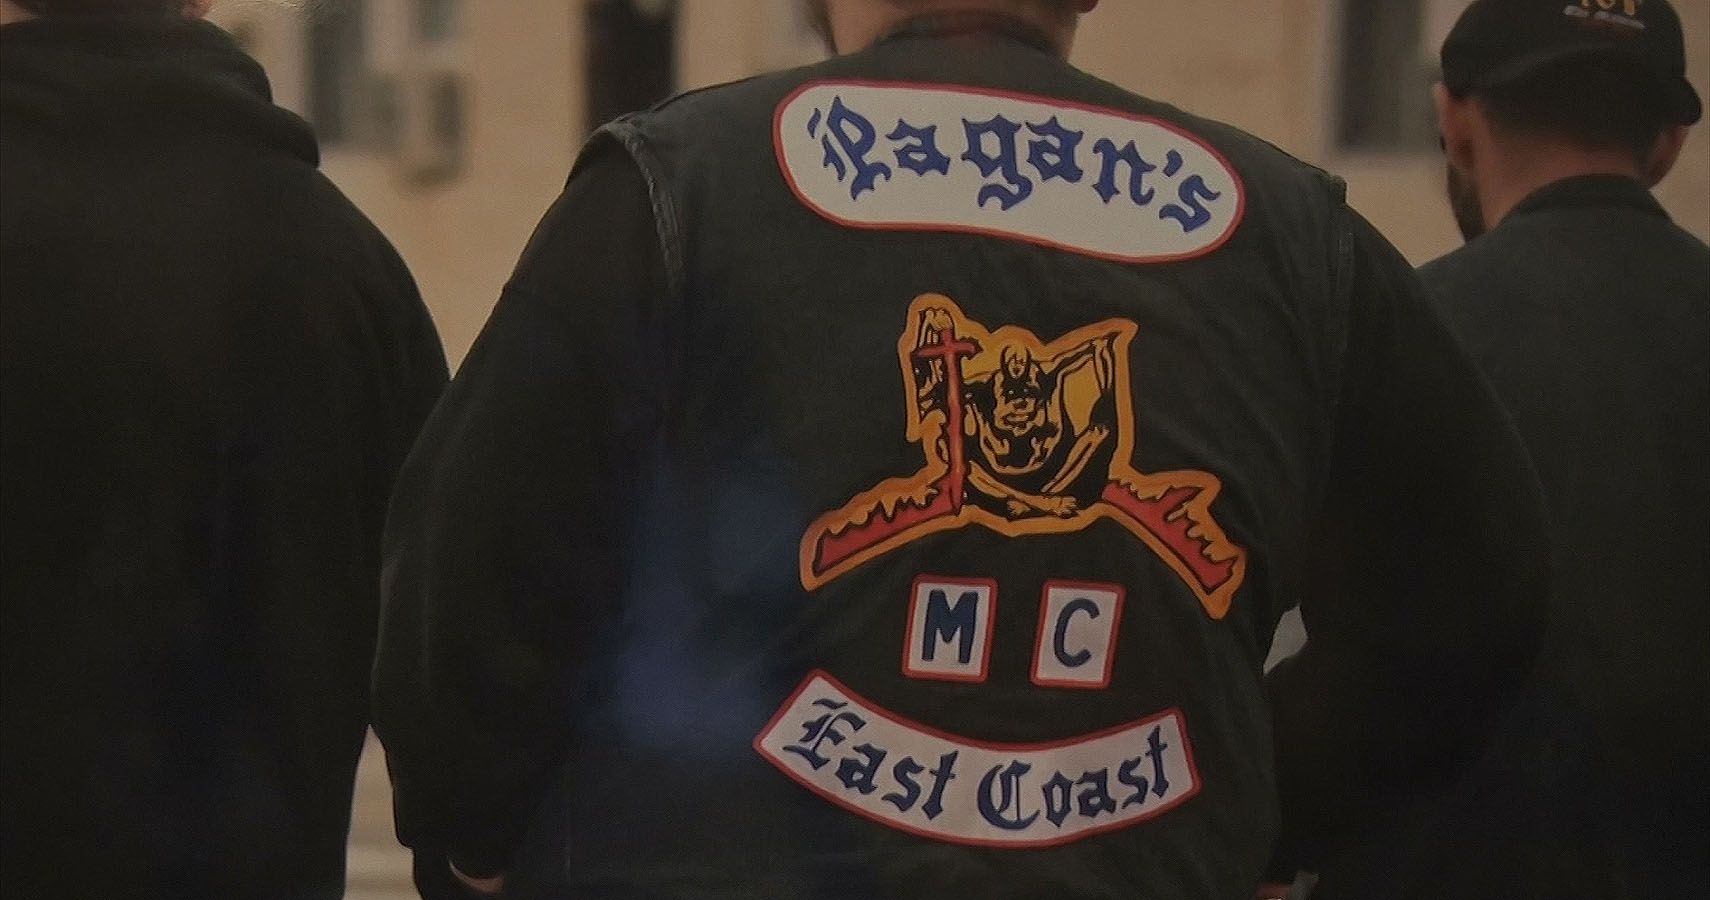 Forget Chapters, Pagans MC Rule The East Coast